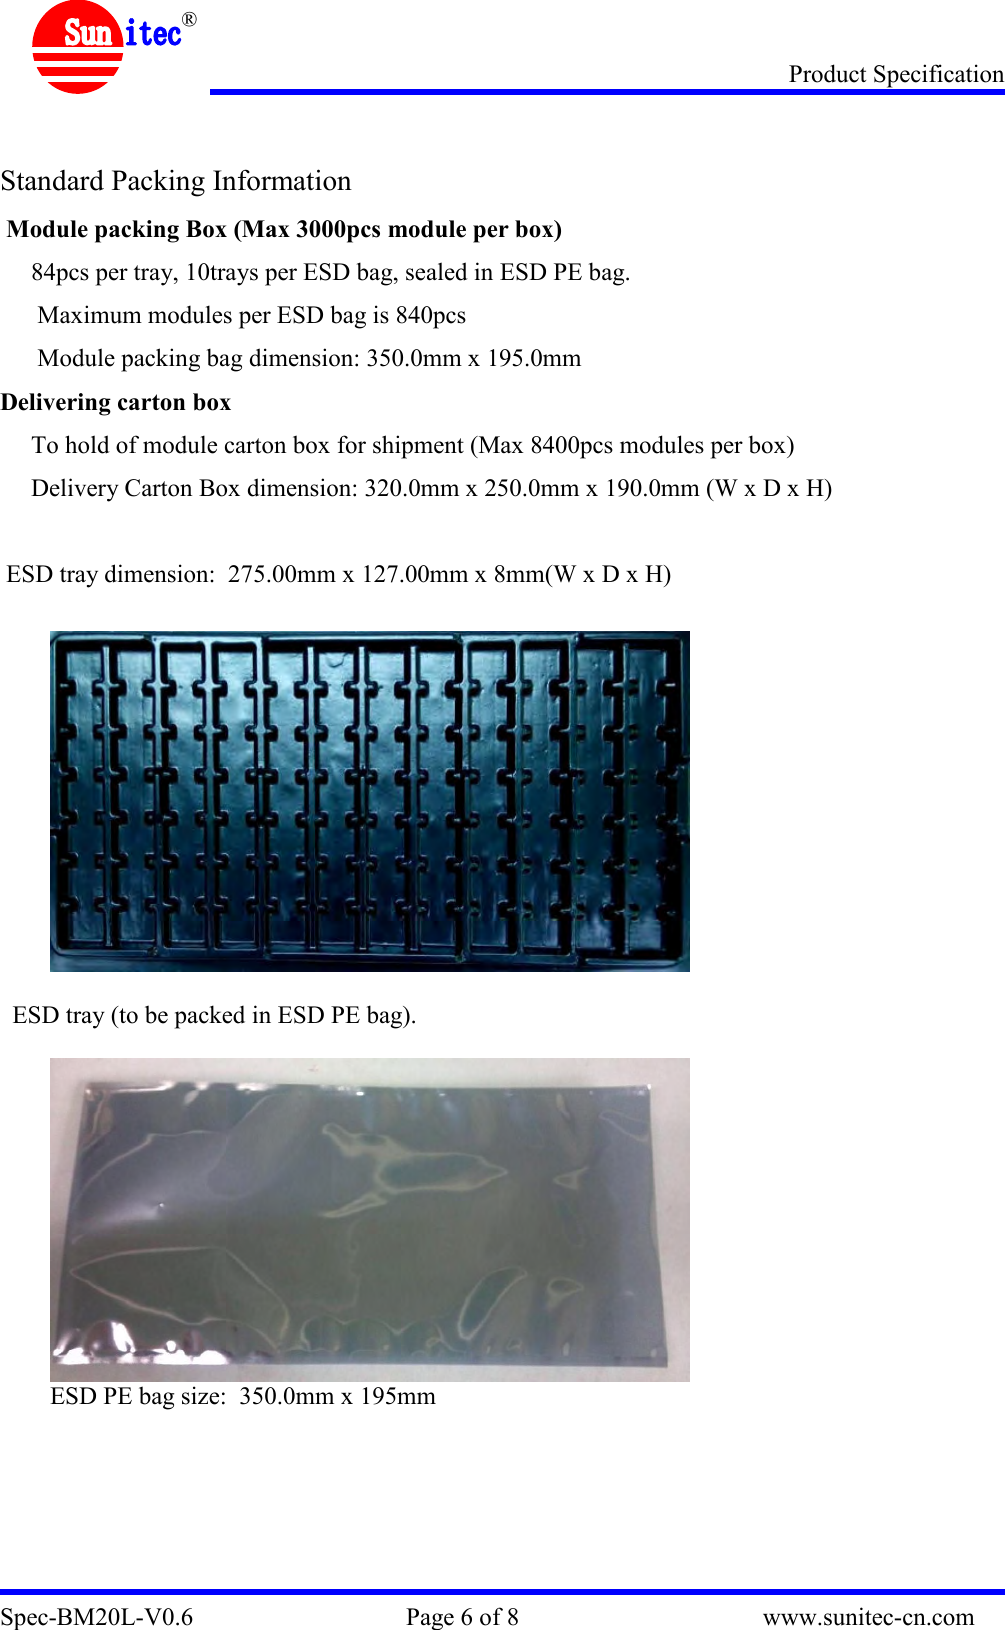 Product Specification Spec-BM20L-V0.6                                  Page 6 of 8                                       www.sunitec-cn.com  ®   Standard Packing Information  Module packing Box (Max 3000pcs module per box)      84pcs per tray, 10trays per ESD bag, sealed in ESD PE bag.       Maximum modules per ESD bag is 840pcs       Module packing bag dimension: 350.0mm x 195.0mm  Delivering carton box      To hold of module carton box for shipment (Max 8400pcs modules per box)      Delivery Carton Box dimension: 320.0mm x 250.0mm x 190.0mm (W x D x H)   ESD tray dimension:  275.00mm x 127.00mm x 8mm(W x D x H)           ESD tray (to be packed in ESD PE bag).   ESD PE bag size:  350.0mm x 195mm        